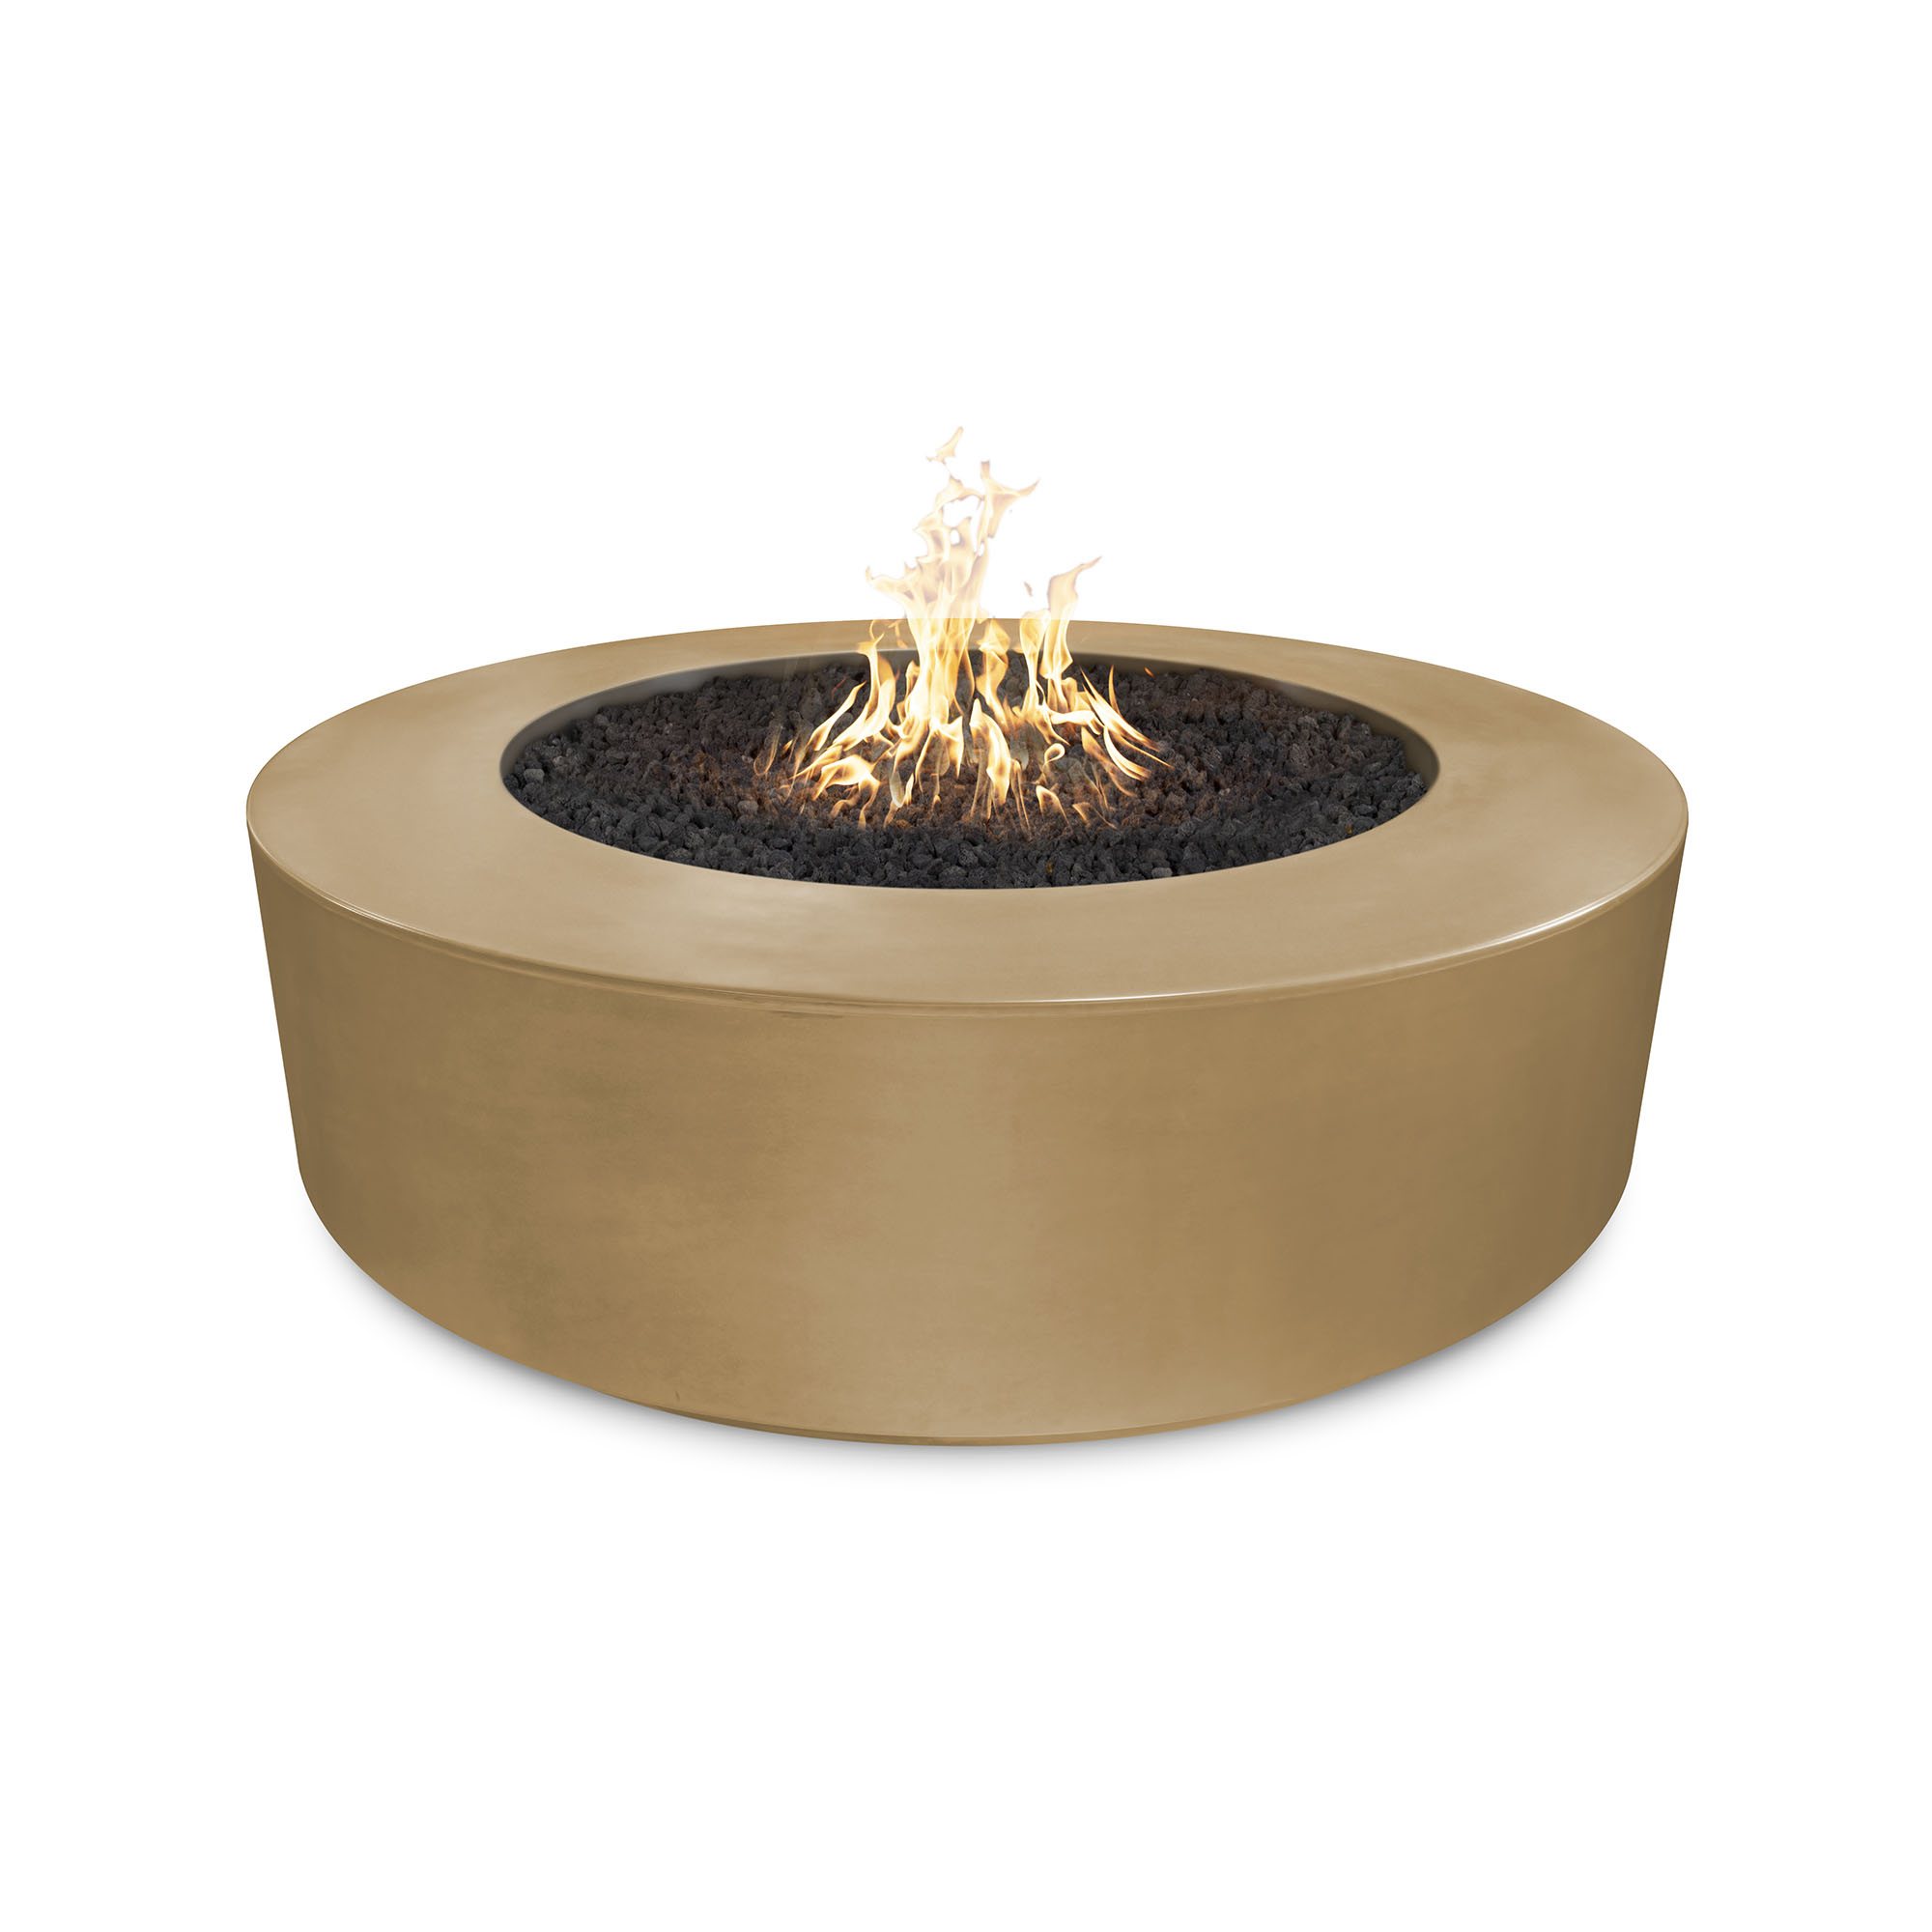 Florence GFRC Fire Pit - 72 inch - Brown